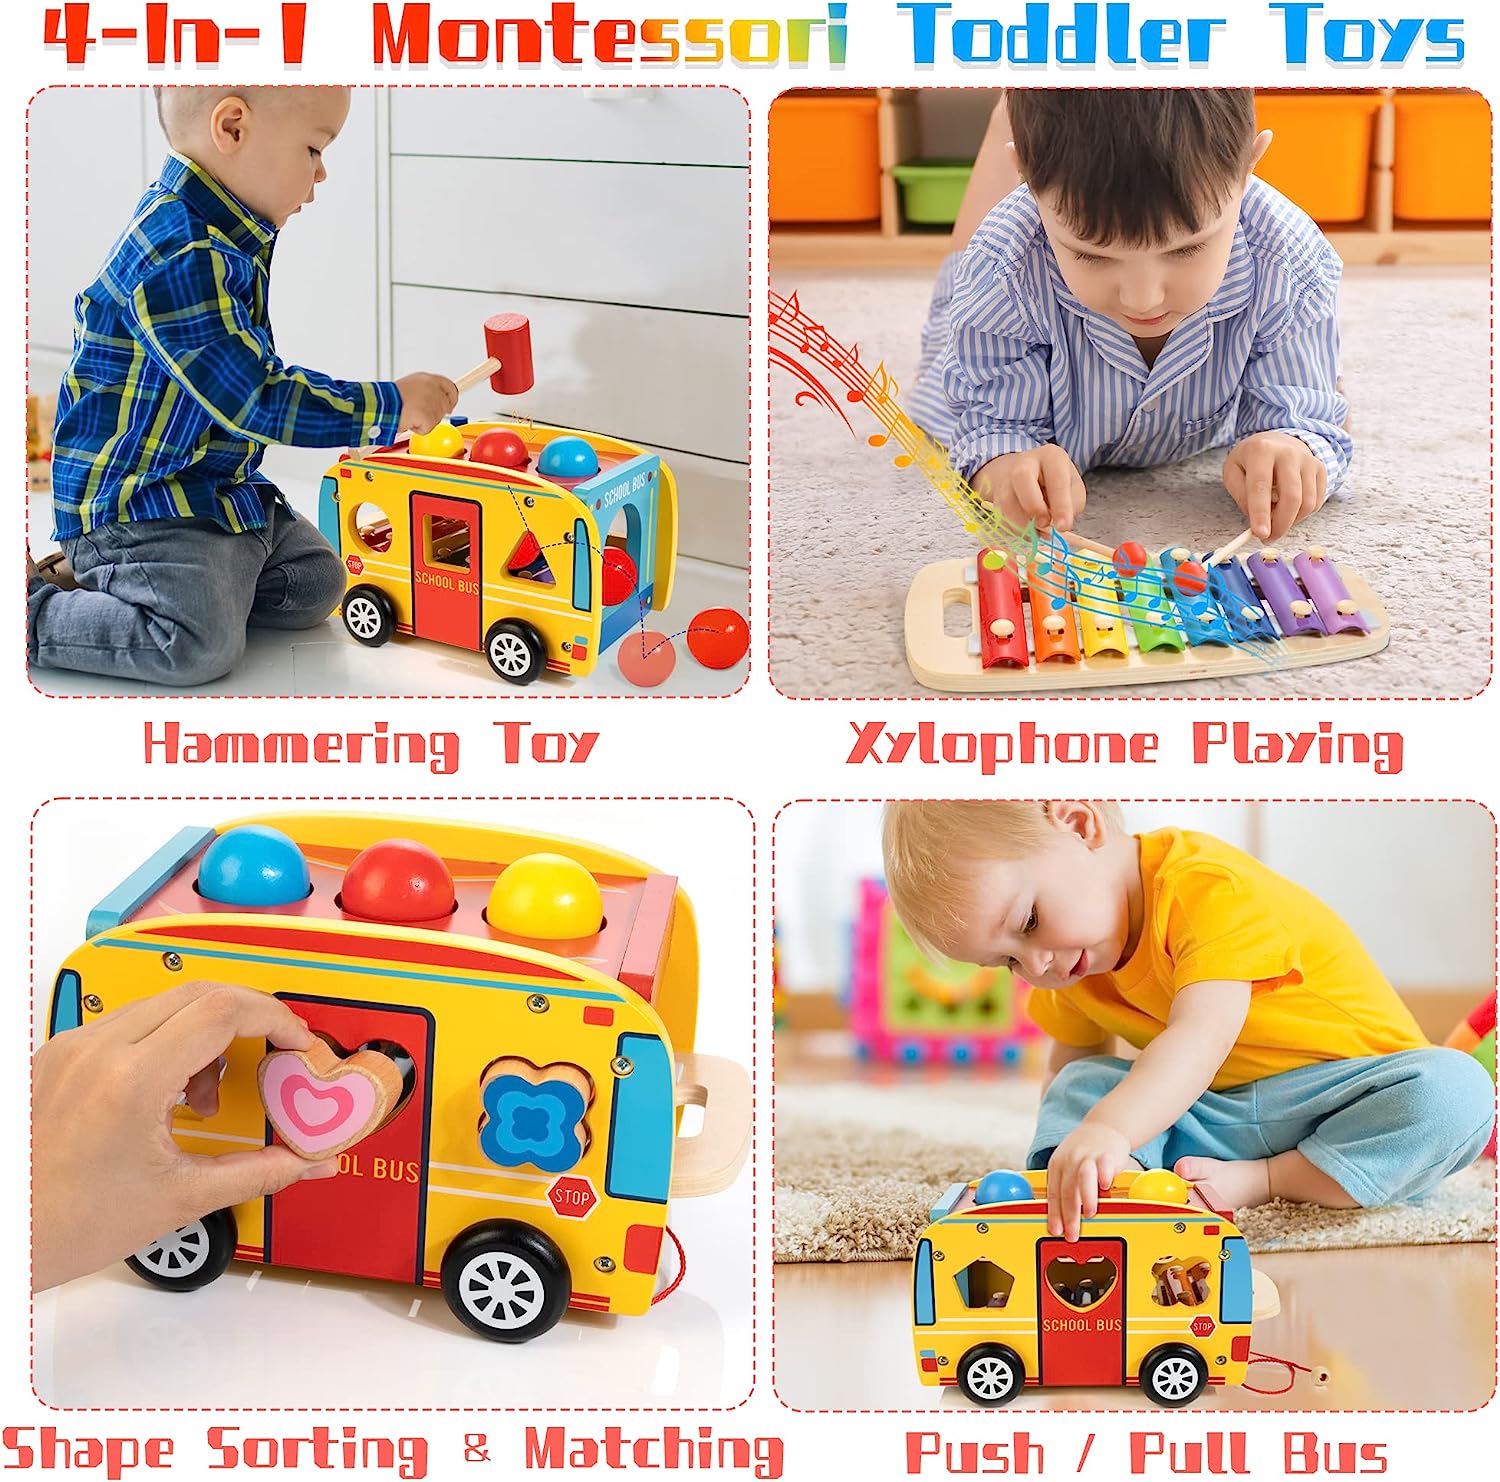 Wooden Pounding Toy - 4 in 1 Wooden Play Set with Pound and Tap Bench, Xylophone, Shape Sorter Car, Push School Bus - Developmental Toys for Toddlers, 1 Year Old Birthday Gift